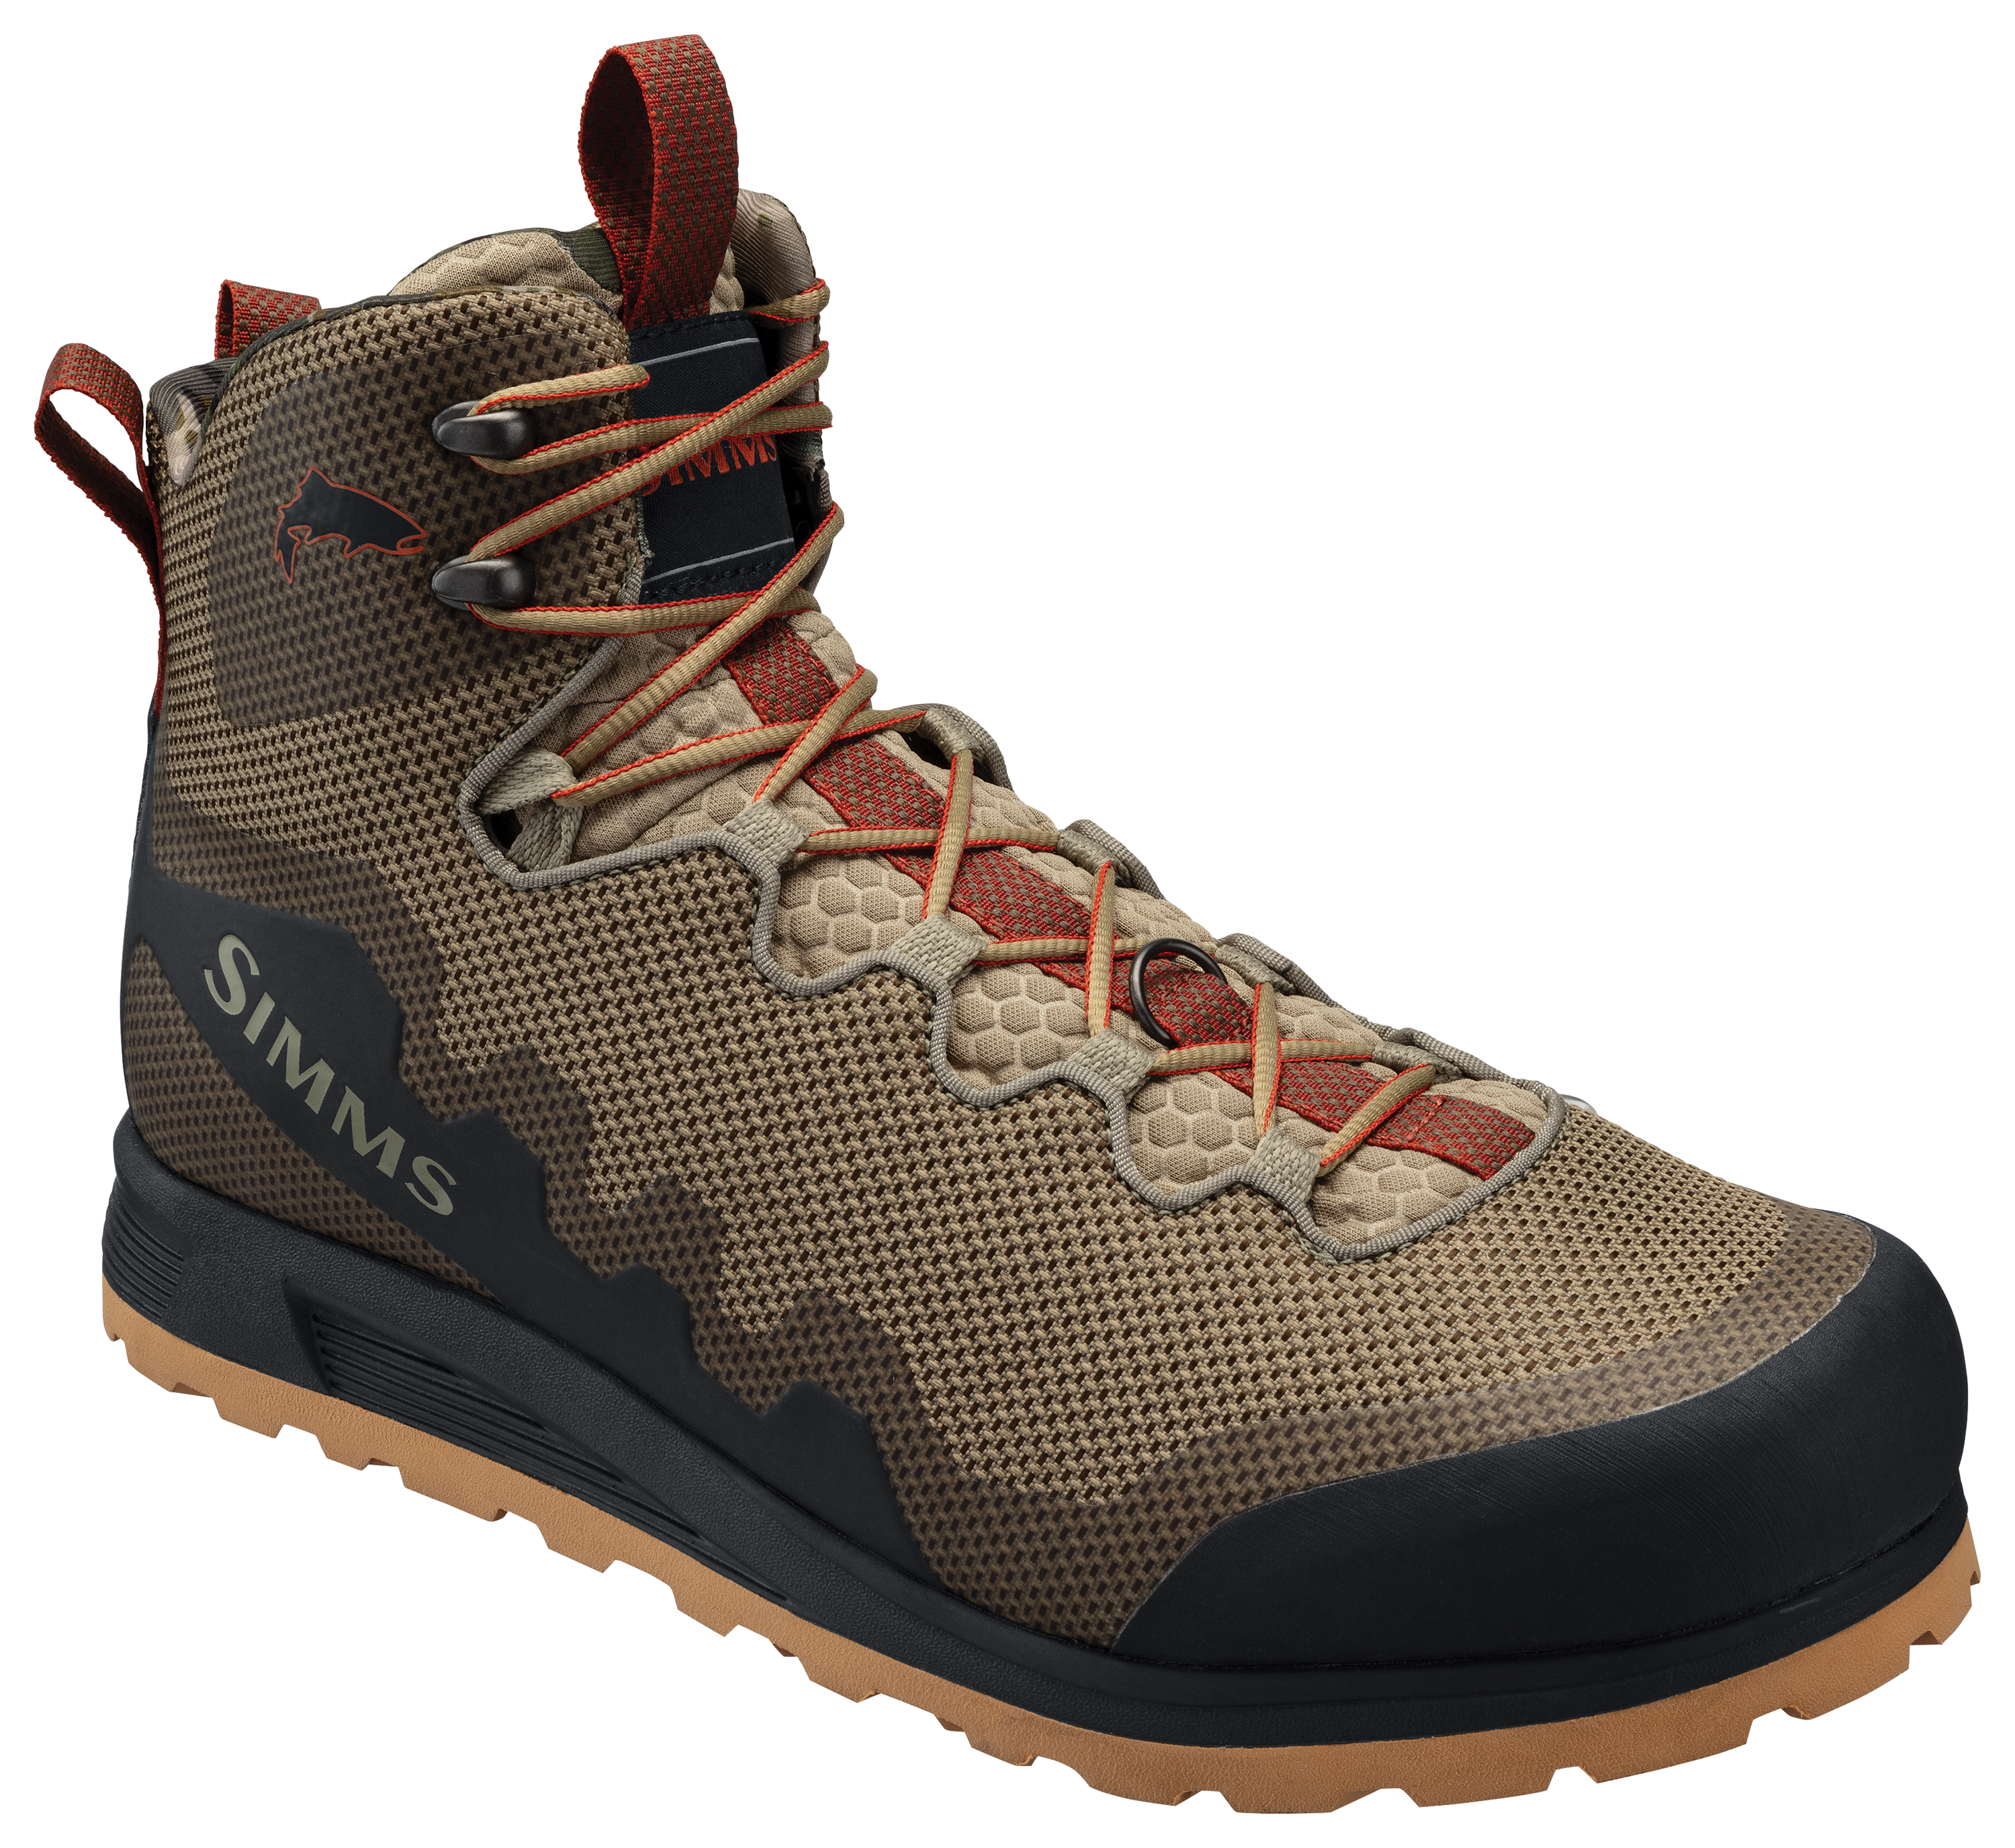 Simms Flyweight Access Wading Boots for Men